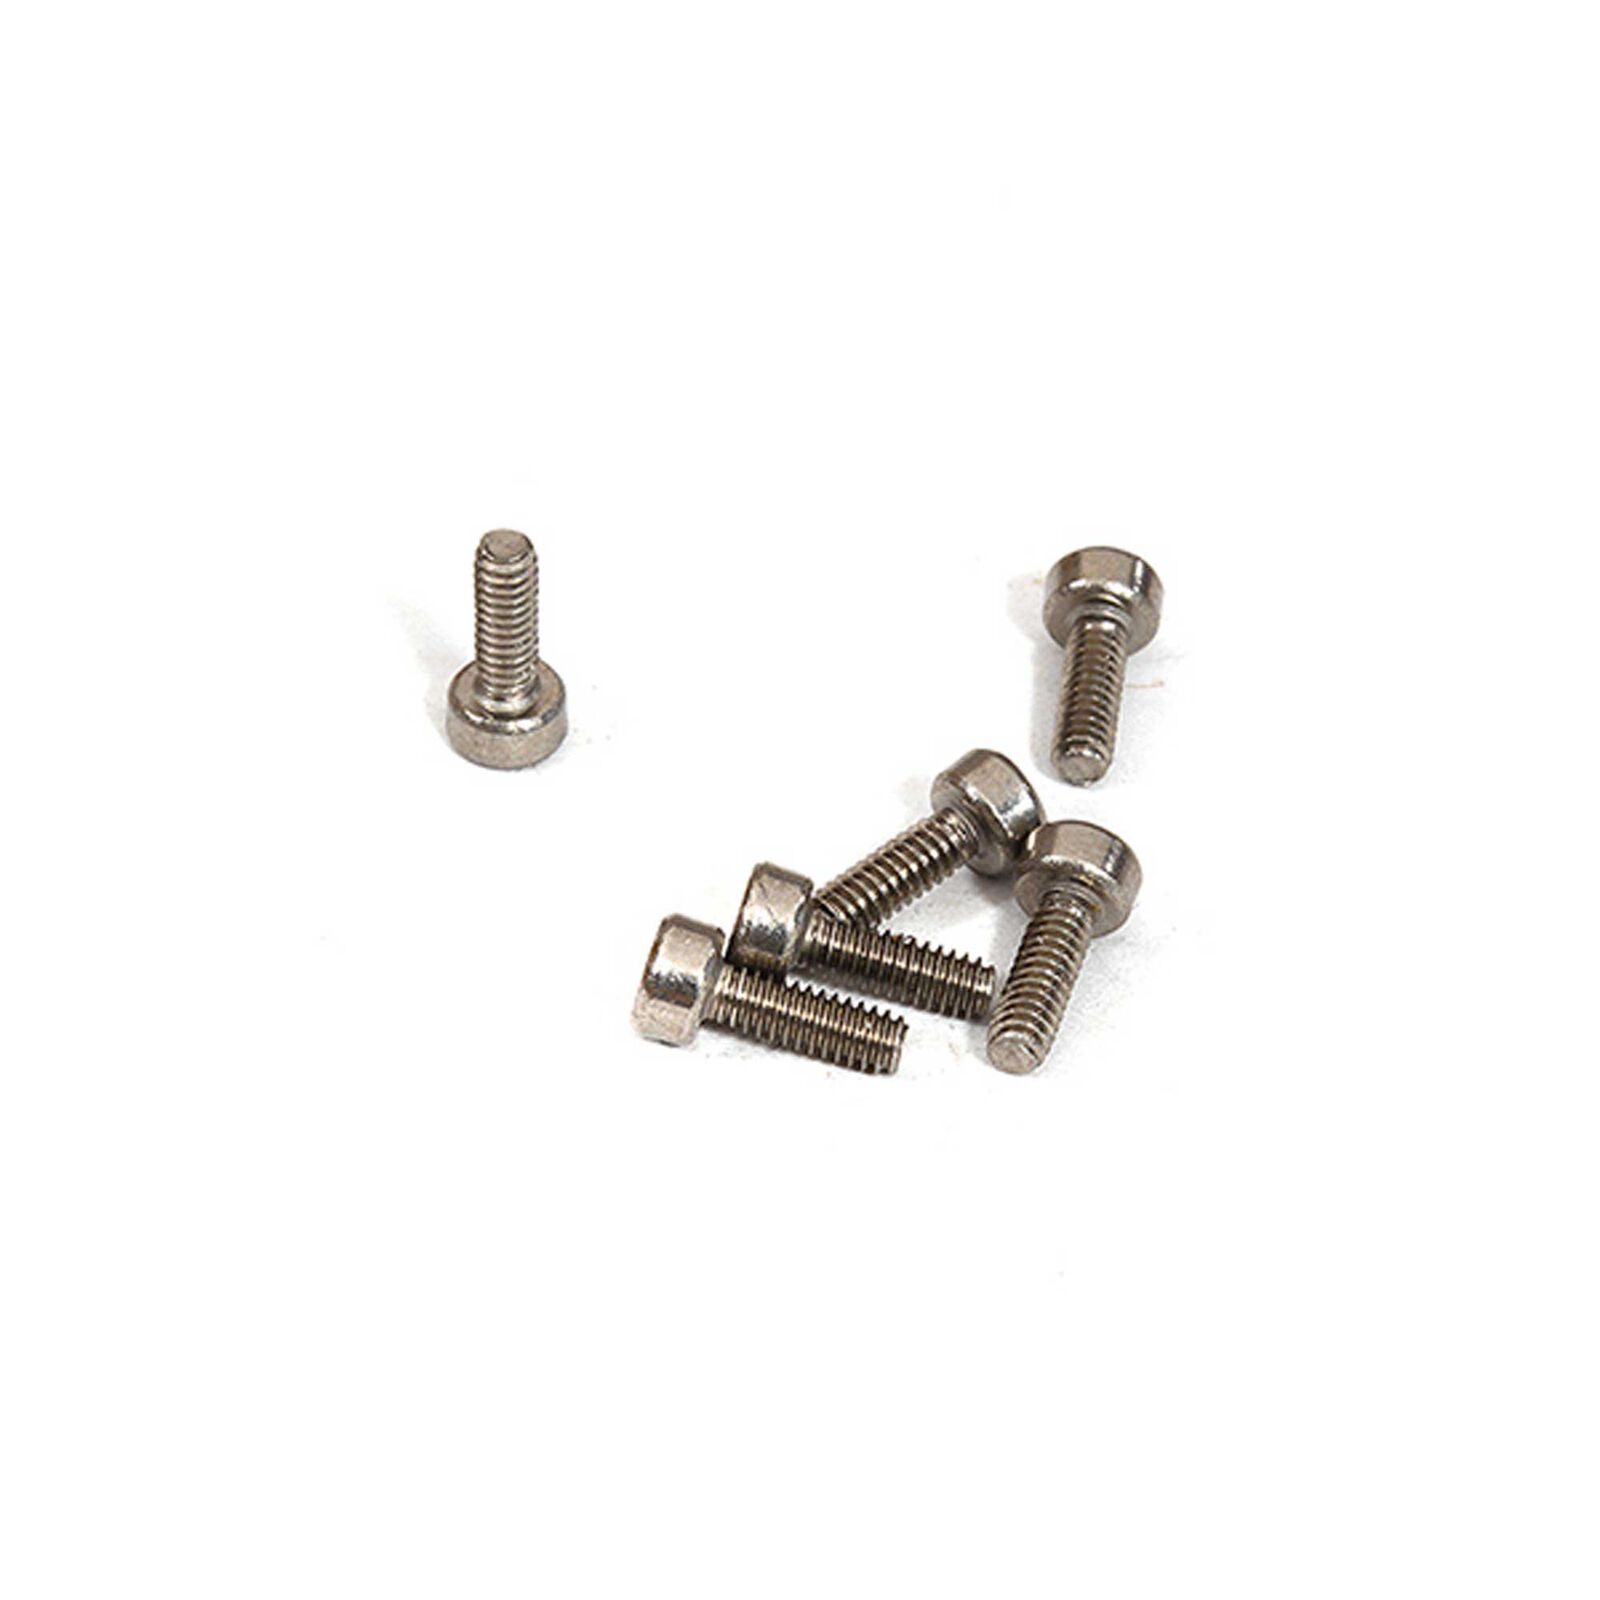 Replacement Screws M2x6mm (6) for C25092 Wheel